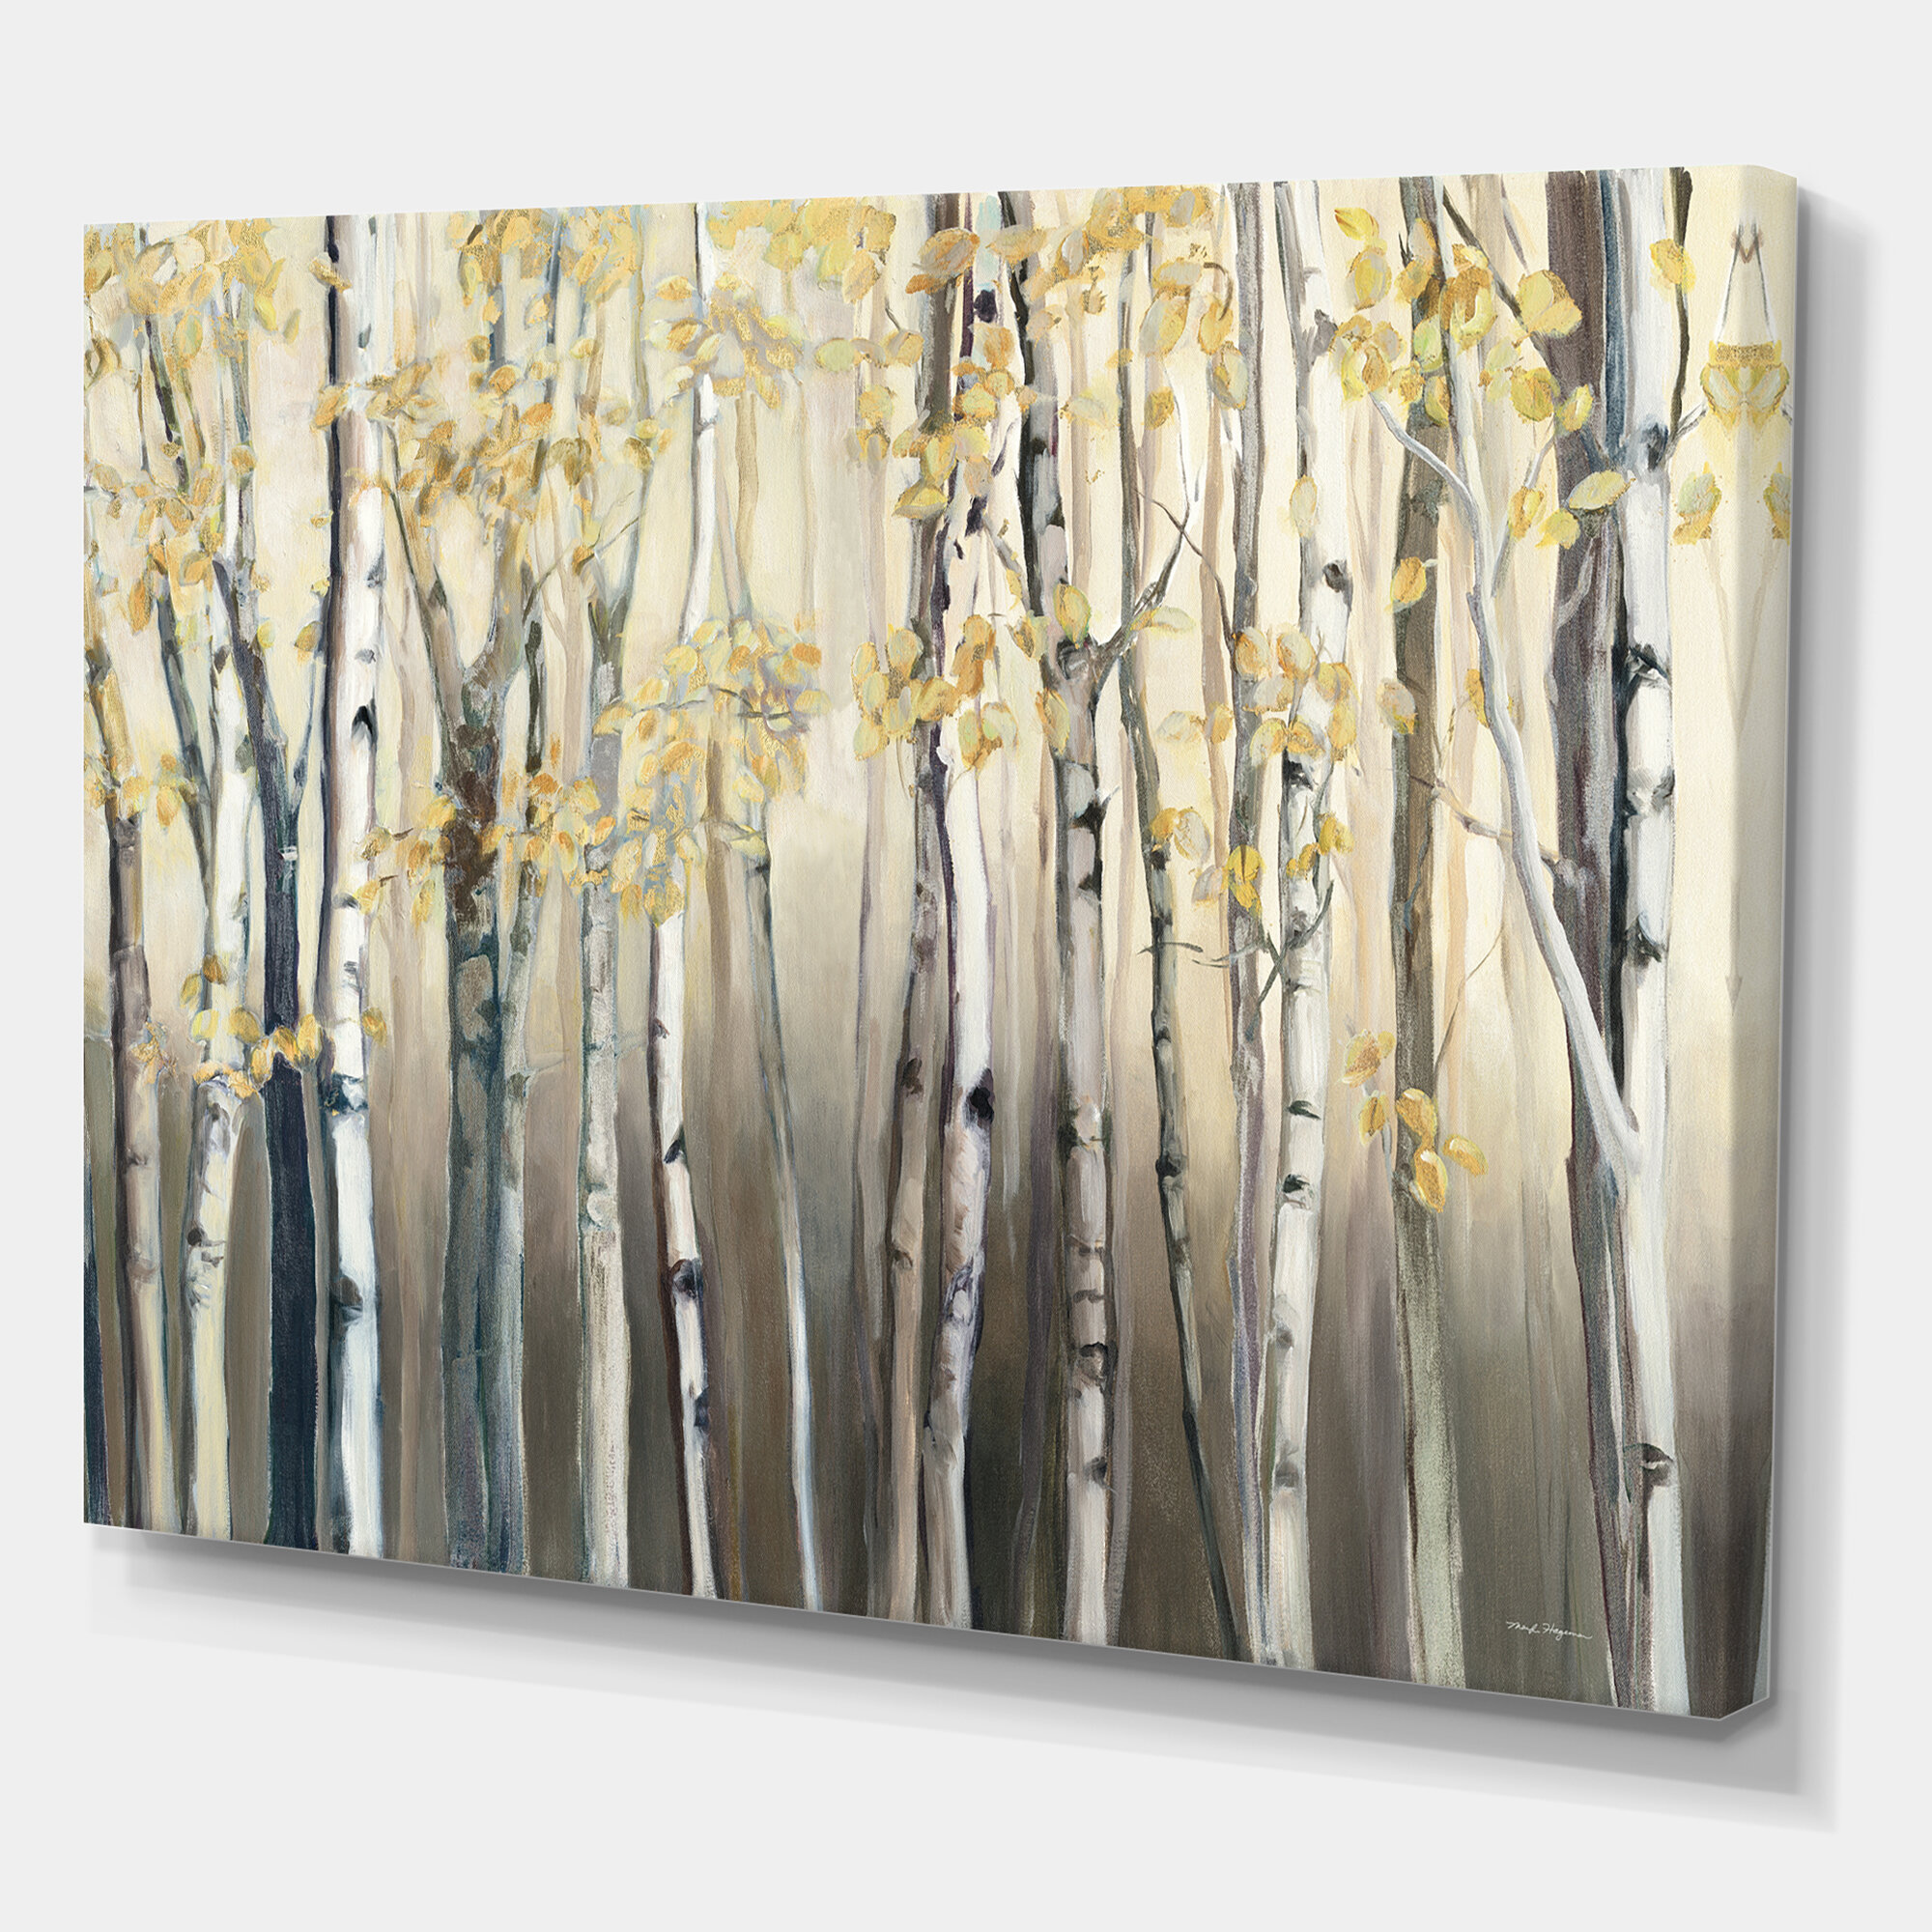 Details about   3D Lakeside Birch Forest 1 Framed Poster Home Decor Print Painting Art WALLPAPER 